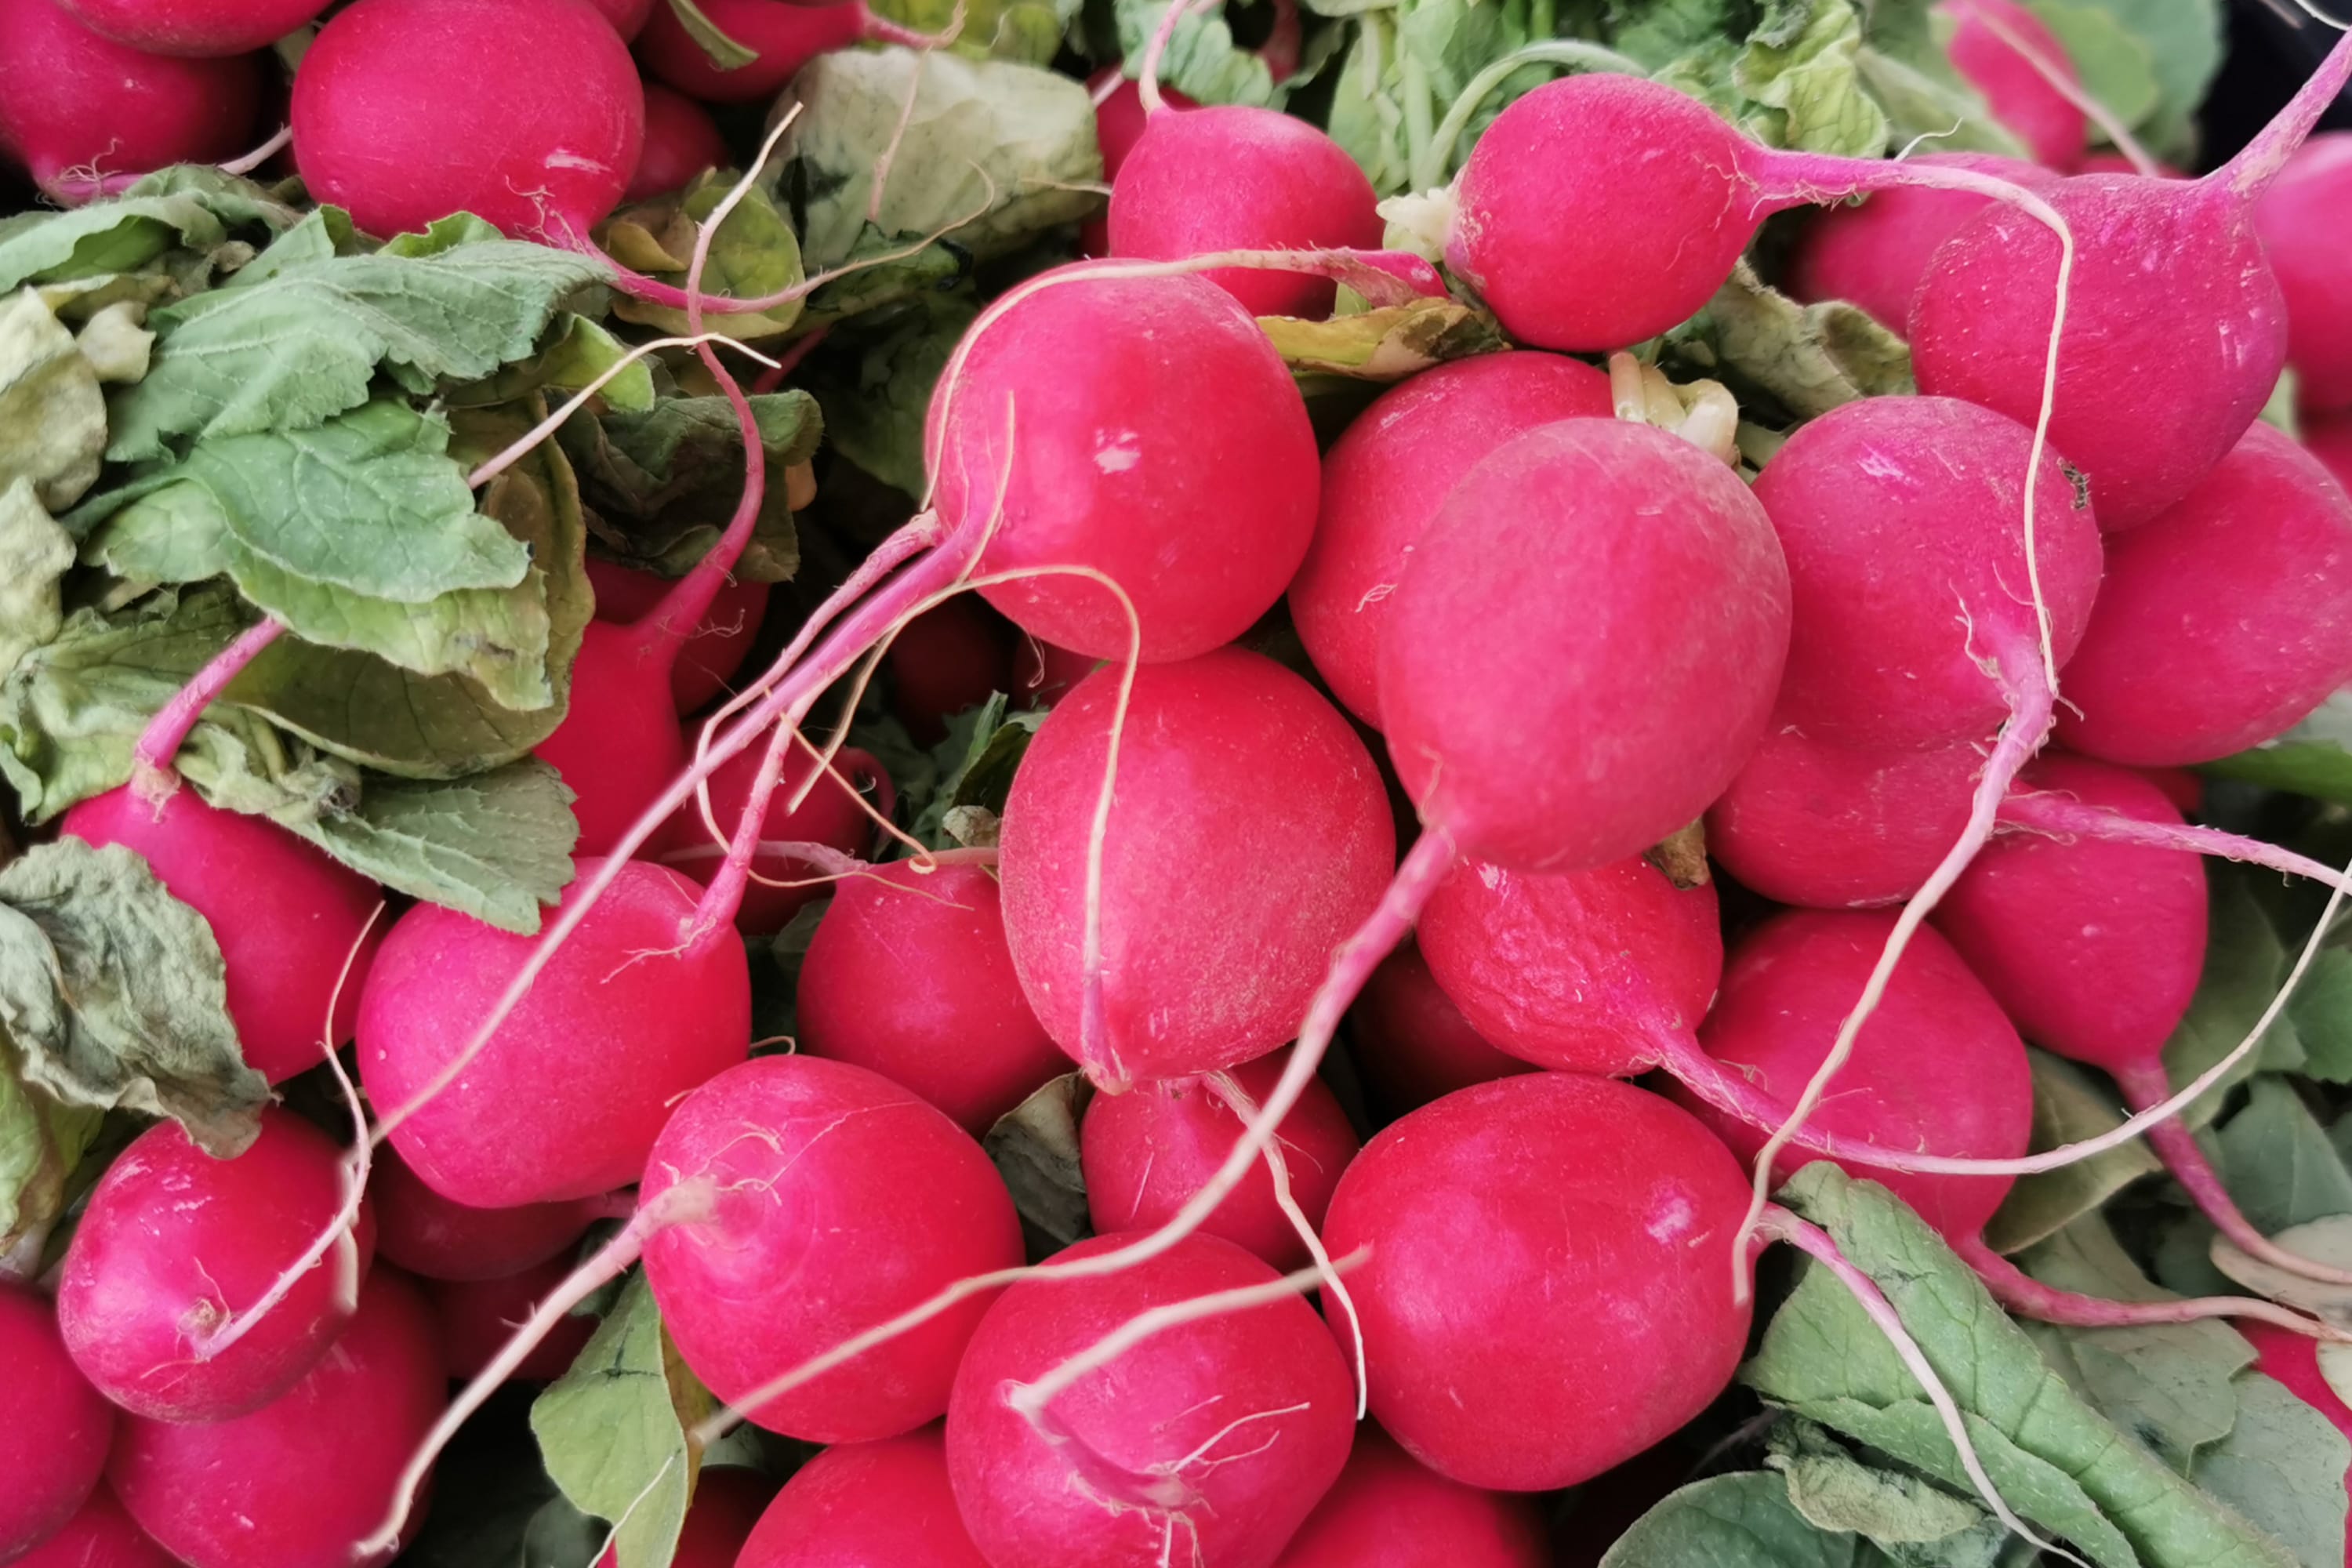 How to defrost radishes